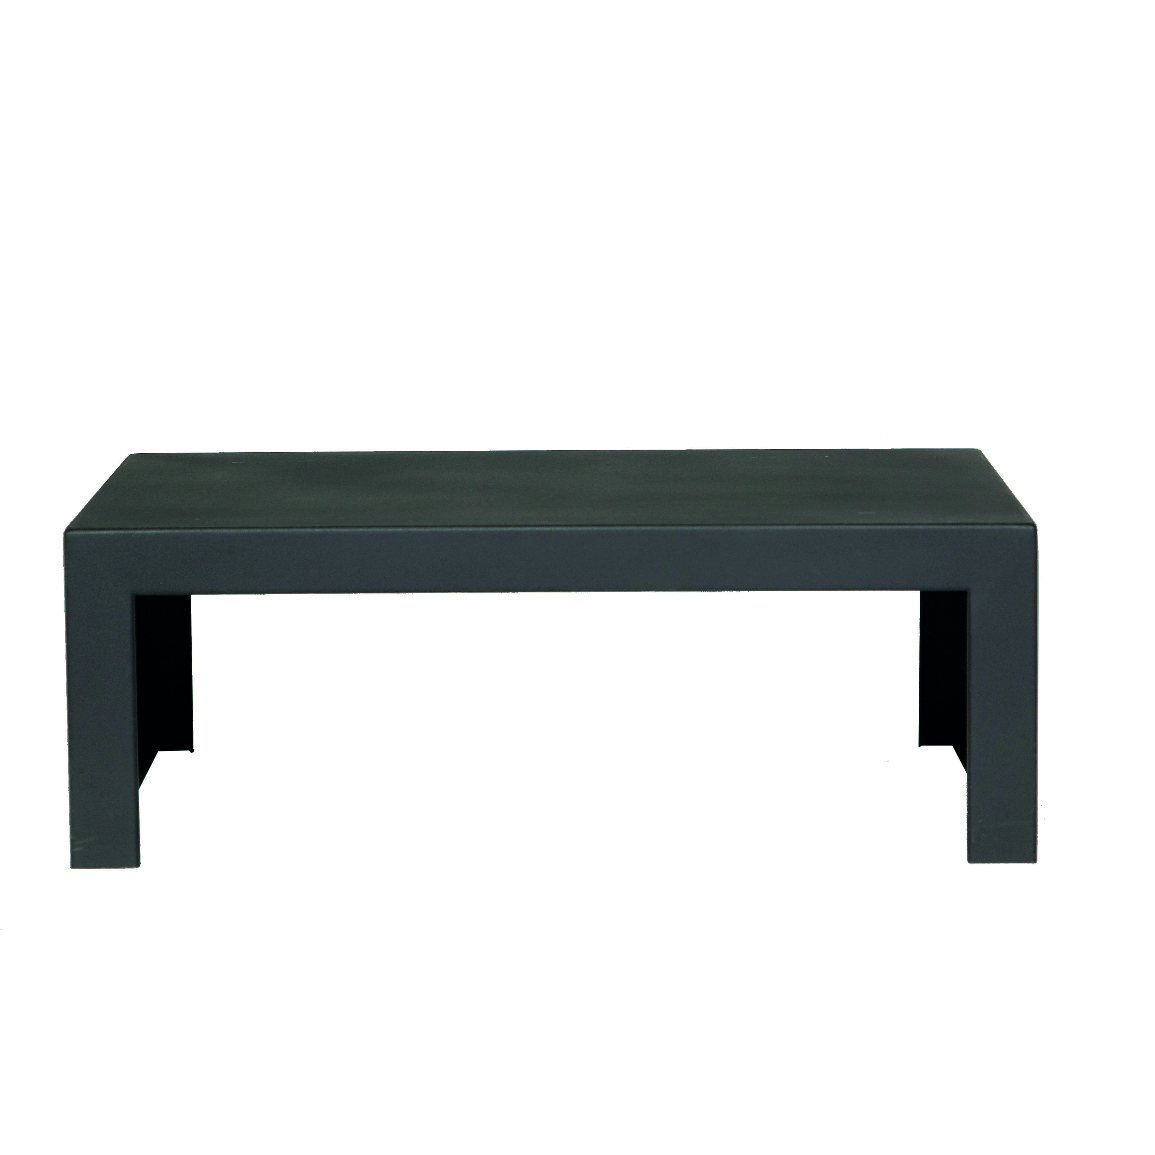 0008689 stove table stand 700 wide